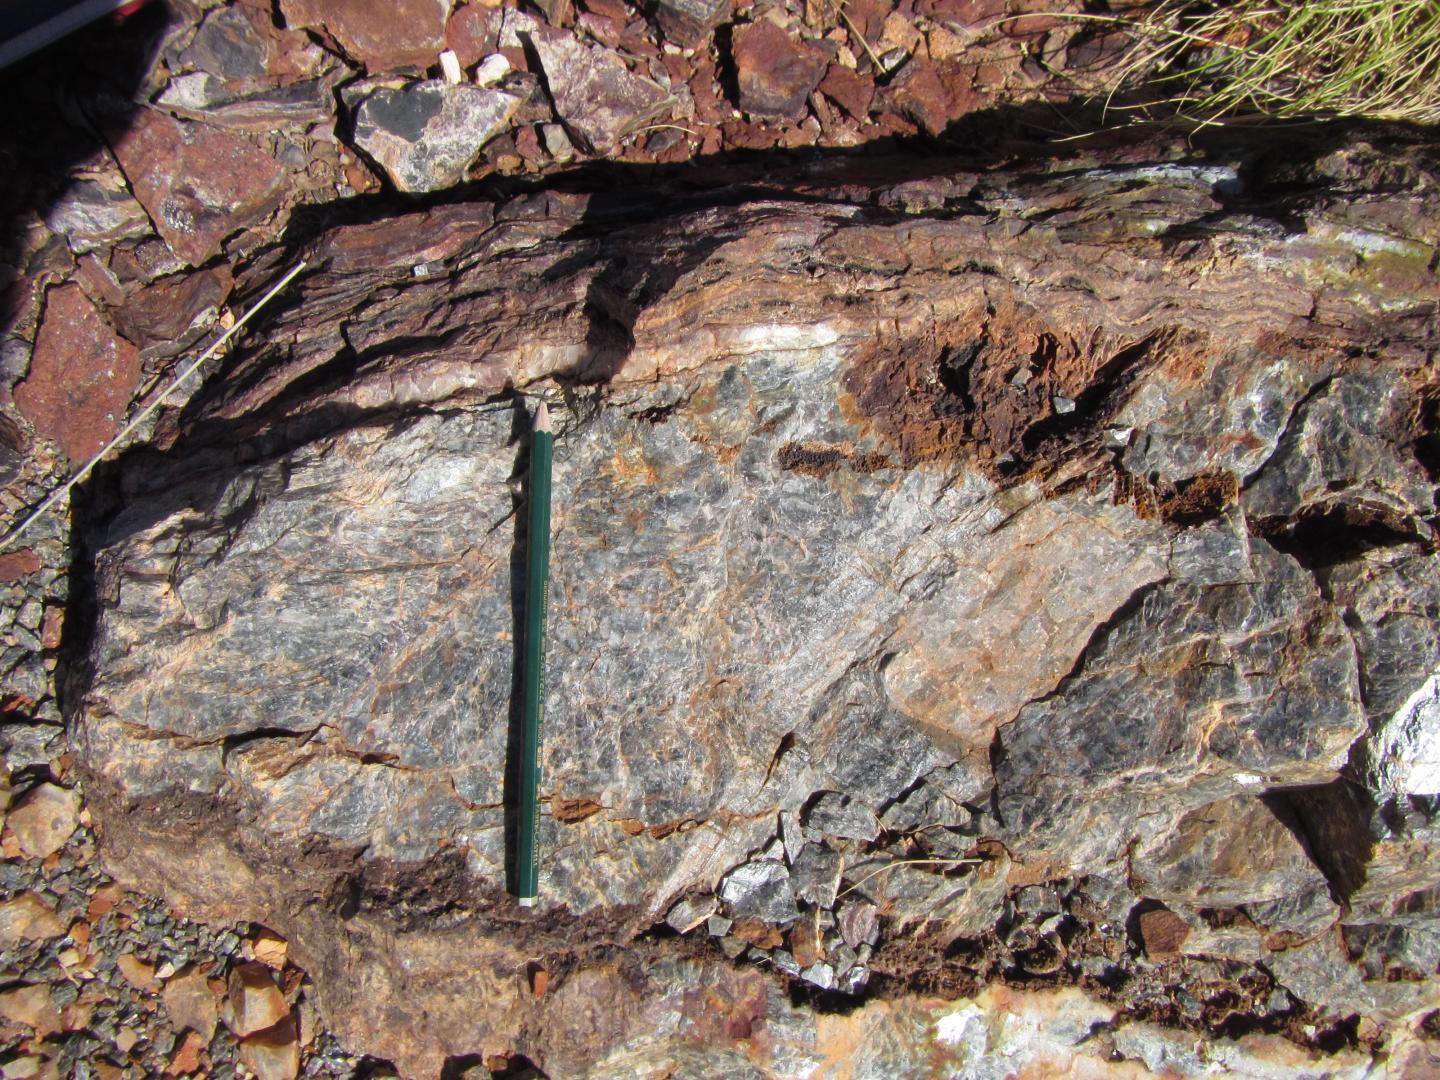 Rocks containing biologically relevant organic molecules